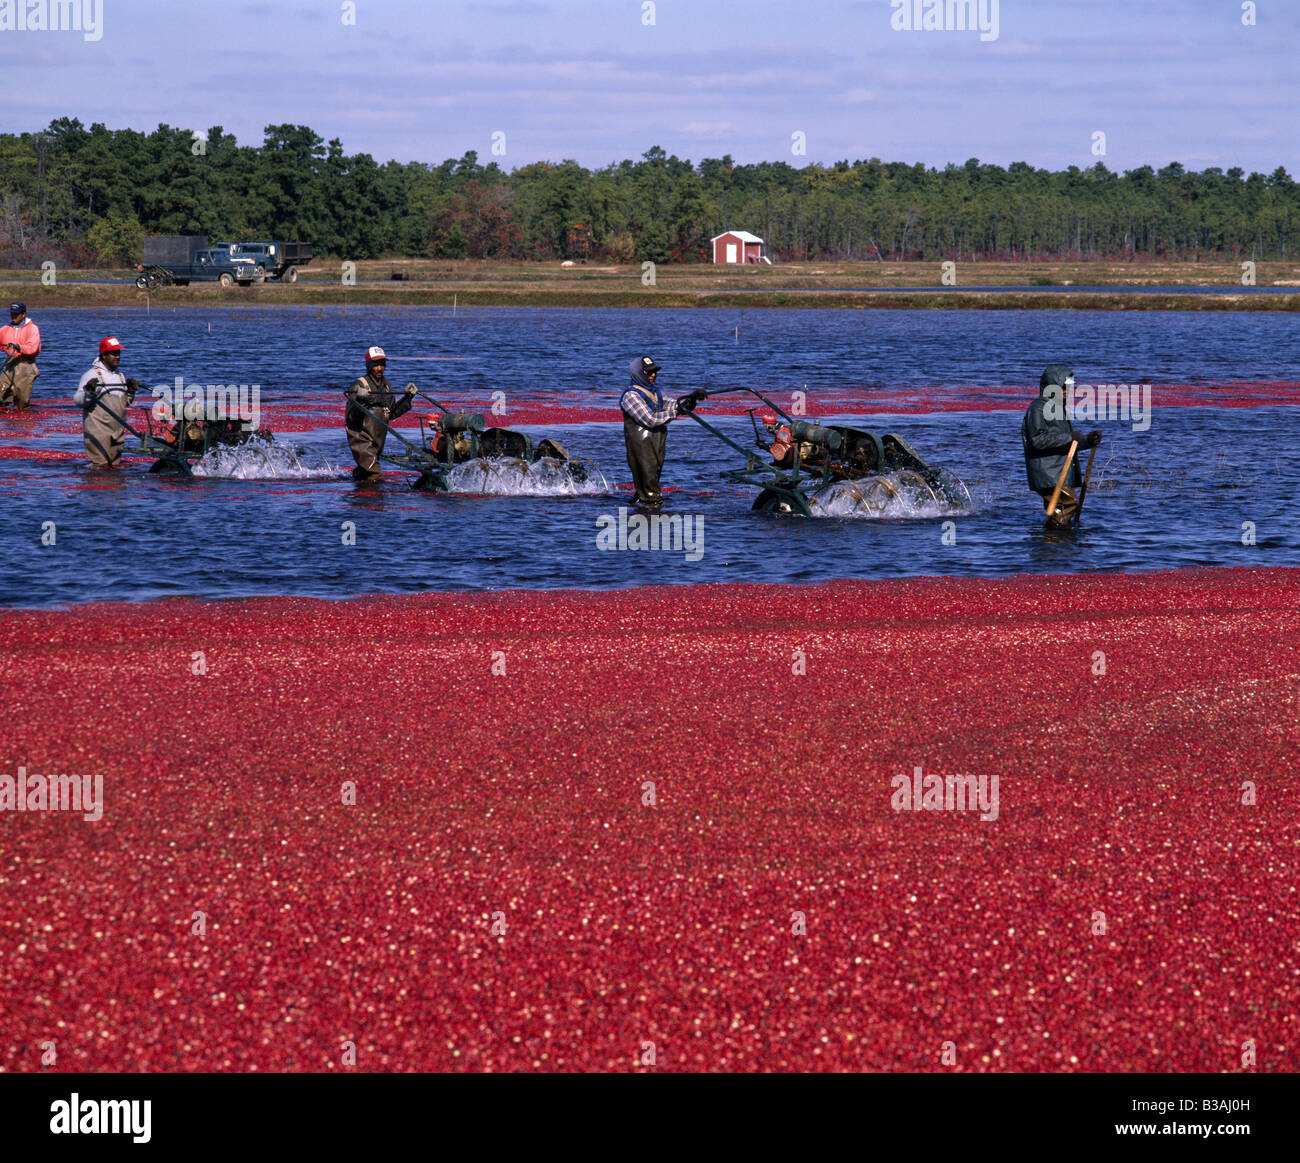 WORKERS LOOSENING THE RIPENED CRANBERRIES OFF PLANT USING WATER REEL OR EGG BEATERS / NEW JERSEY Stock Photo